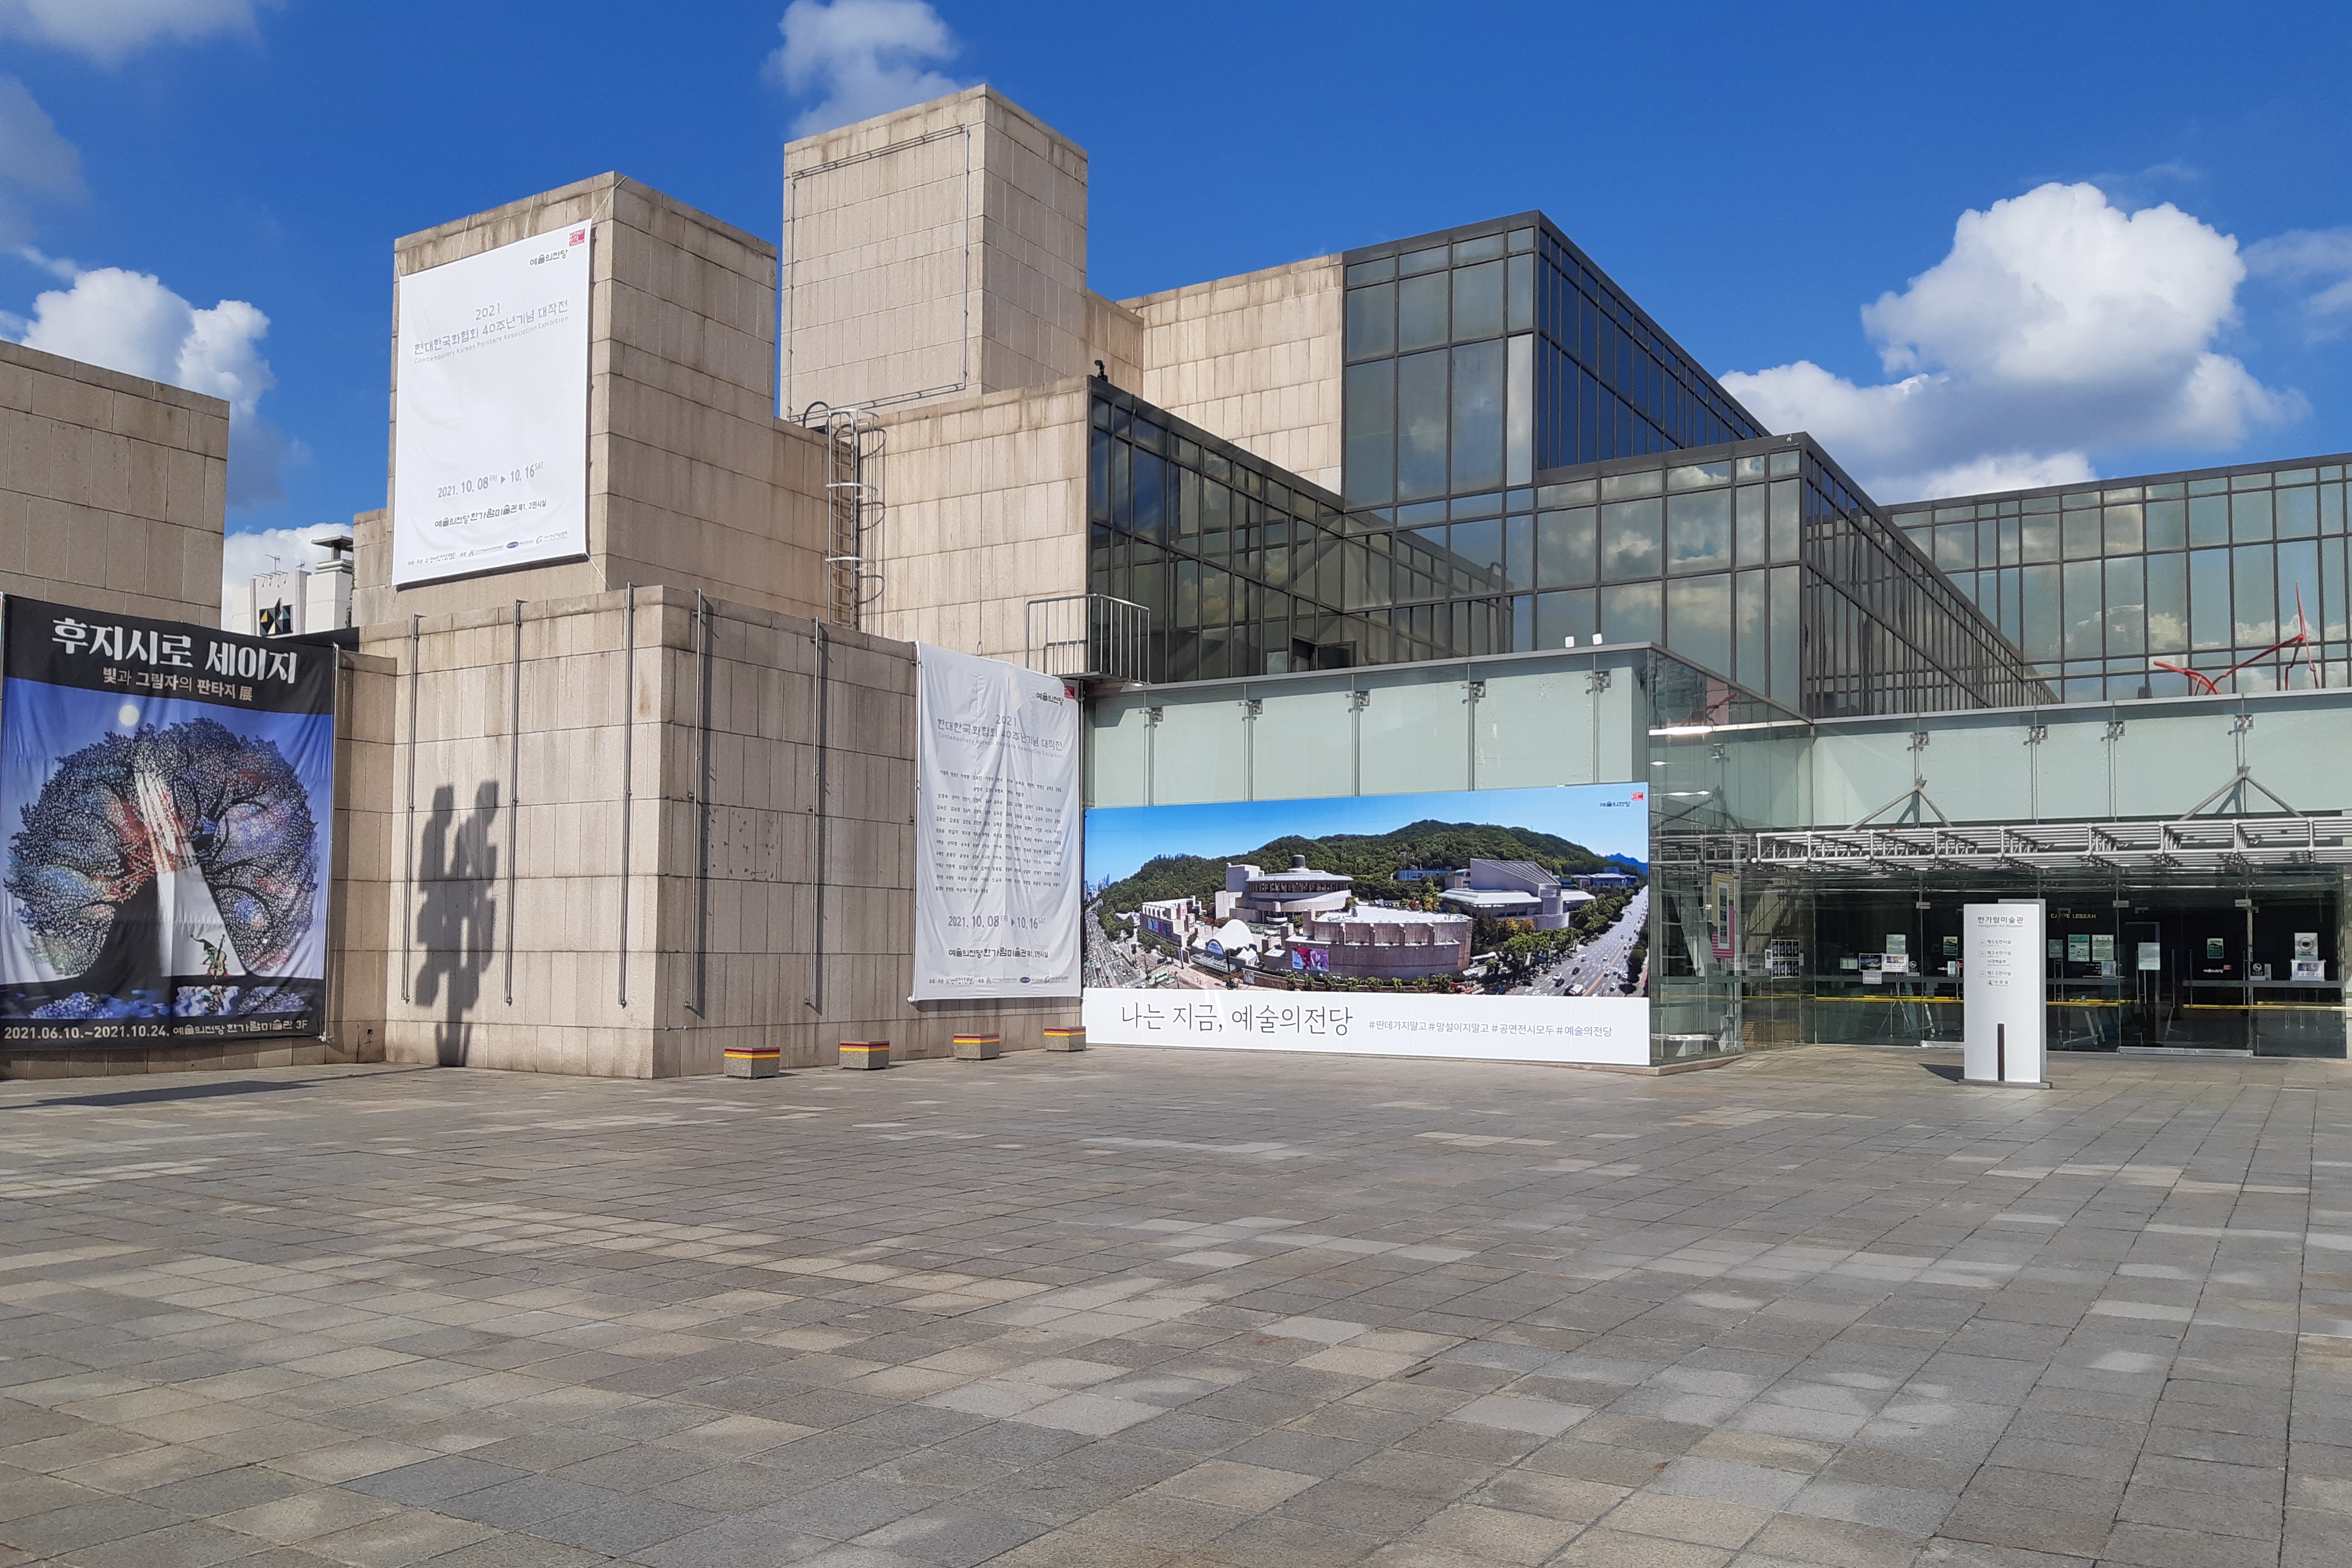 Hangaram Art Museum, Seoul Arts Center1 : Exterior view of part of the main building with exhibition banners of various designs